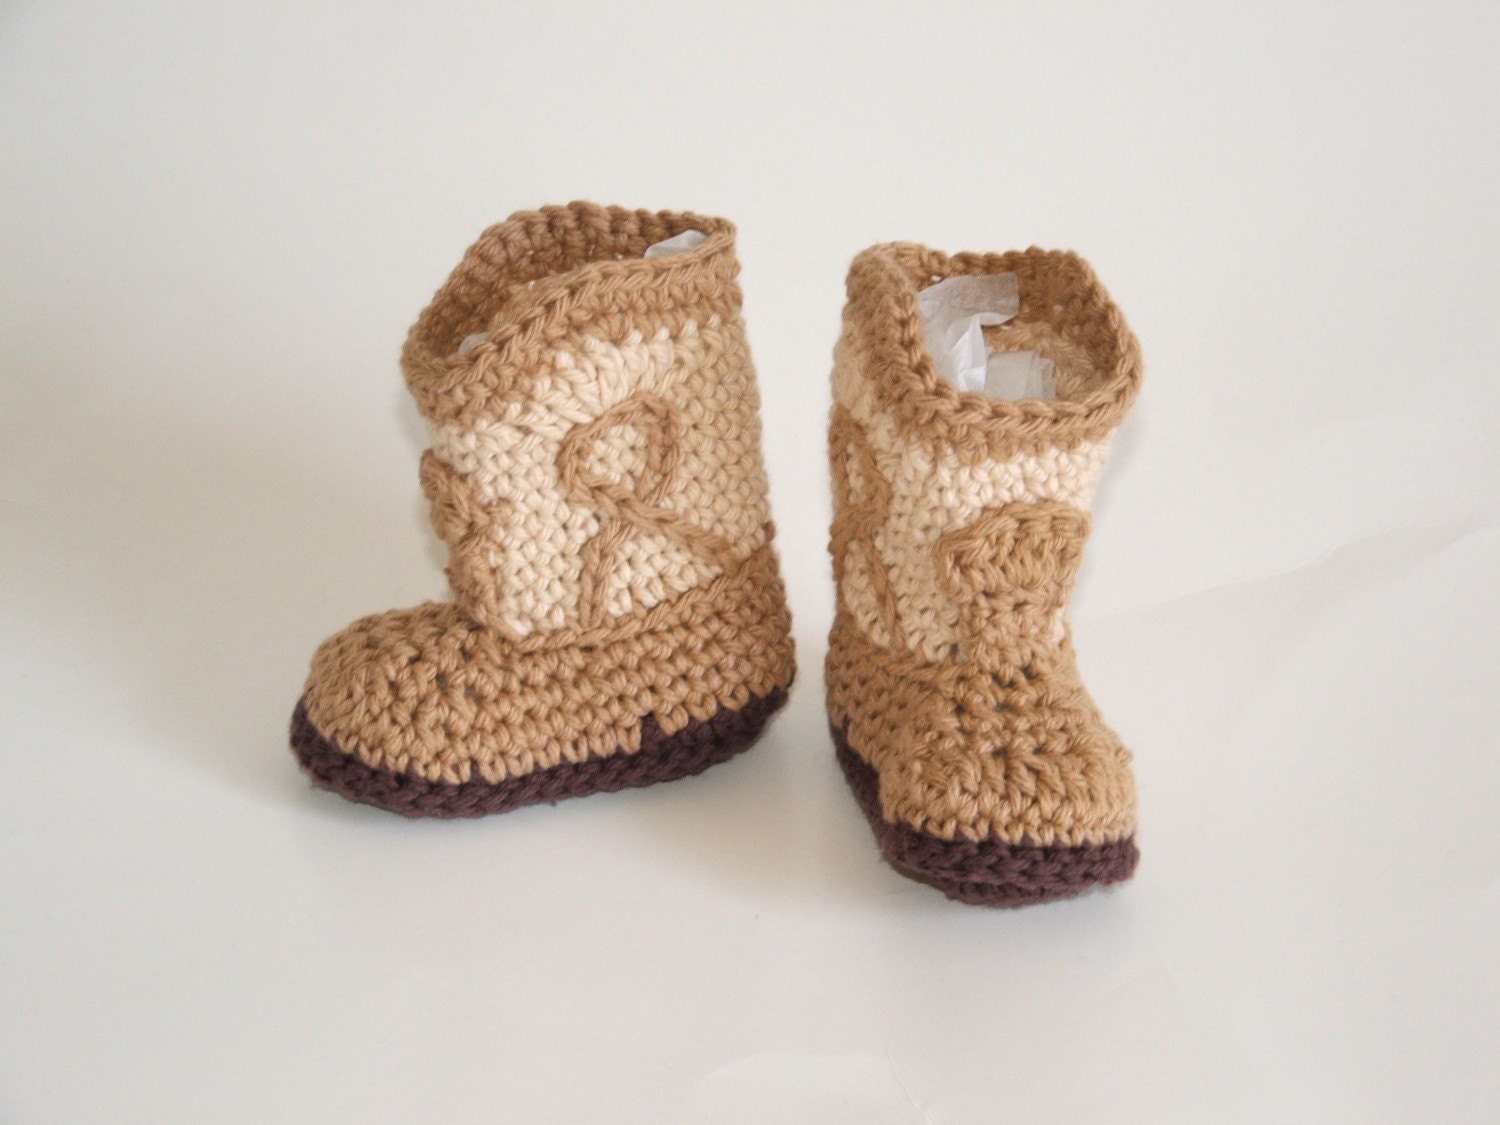 Tan Cowboy Booties, 3 month size, that look like real cowboy boots